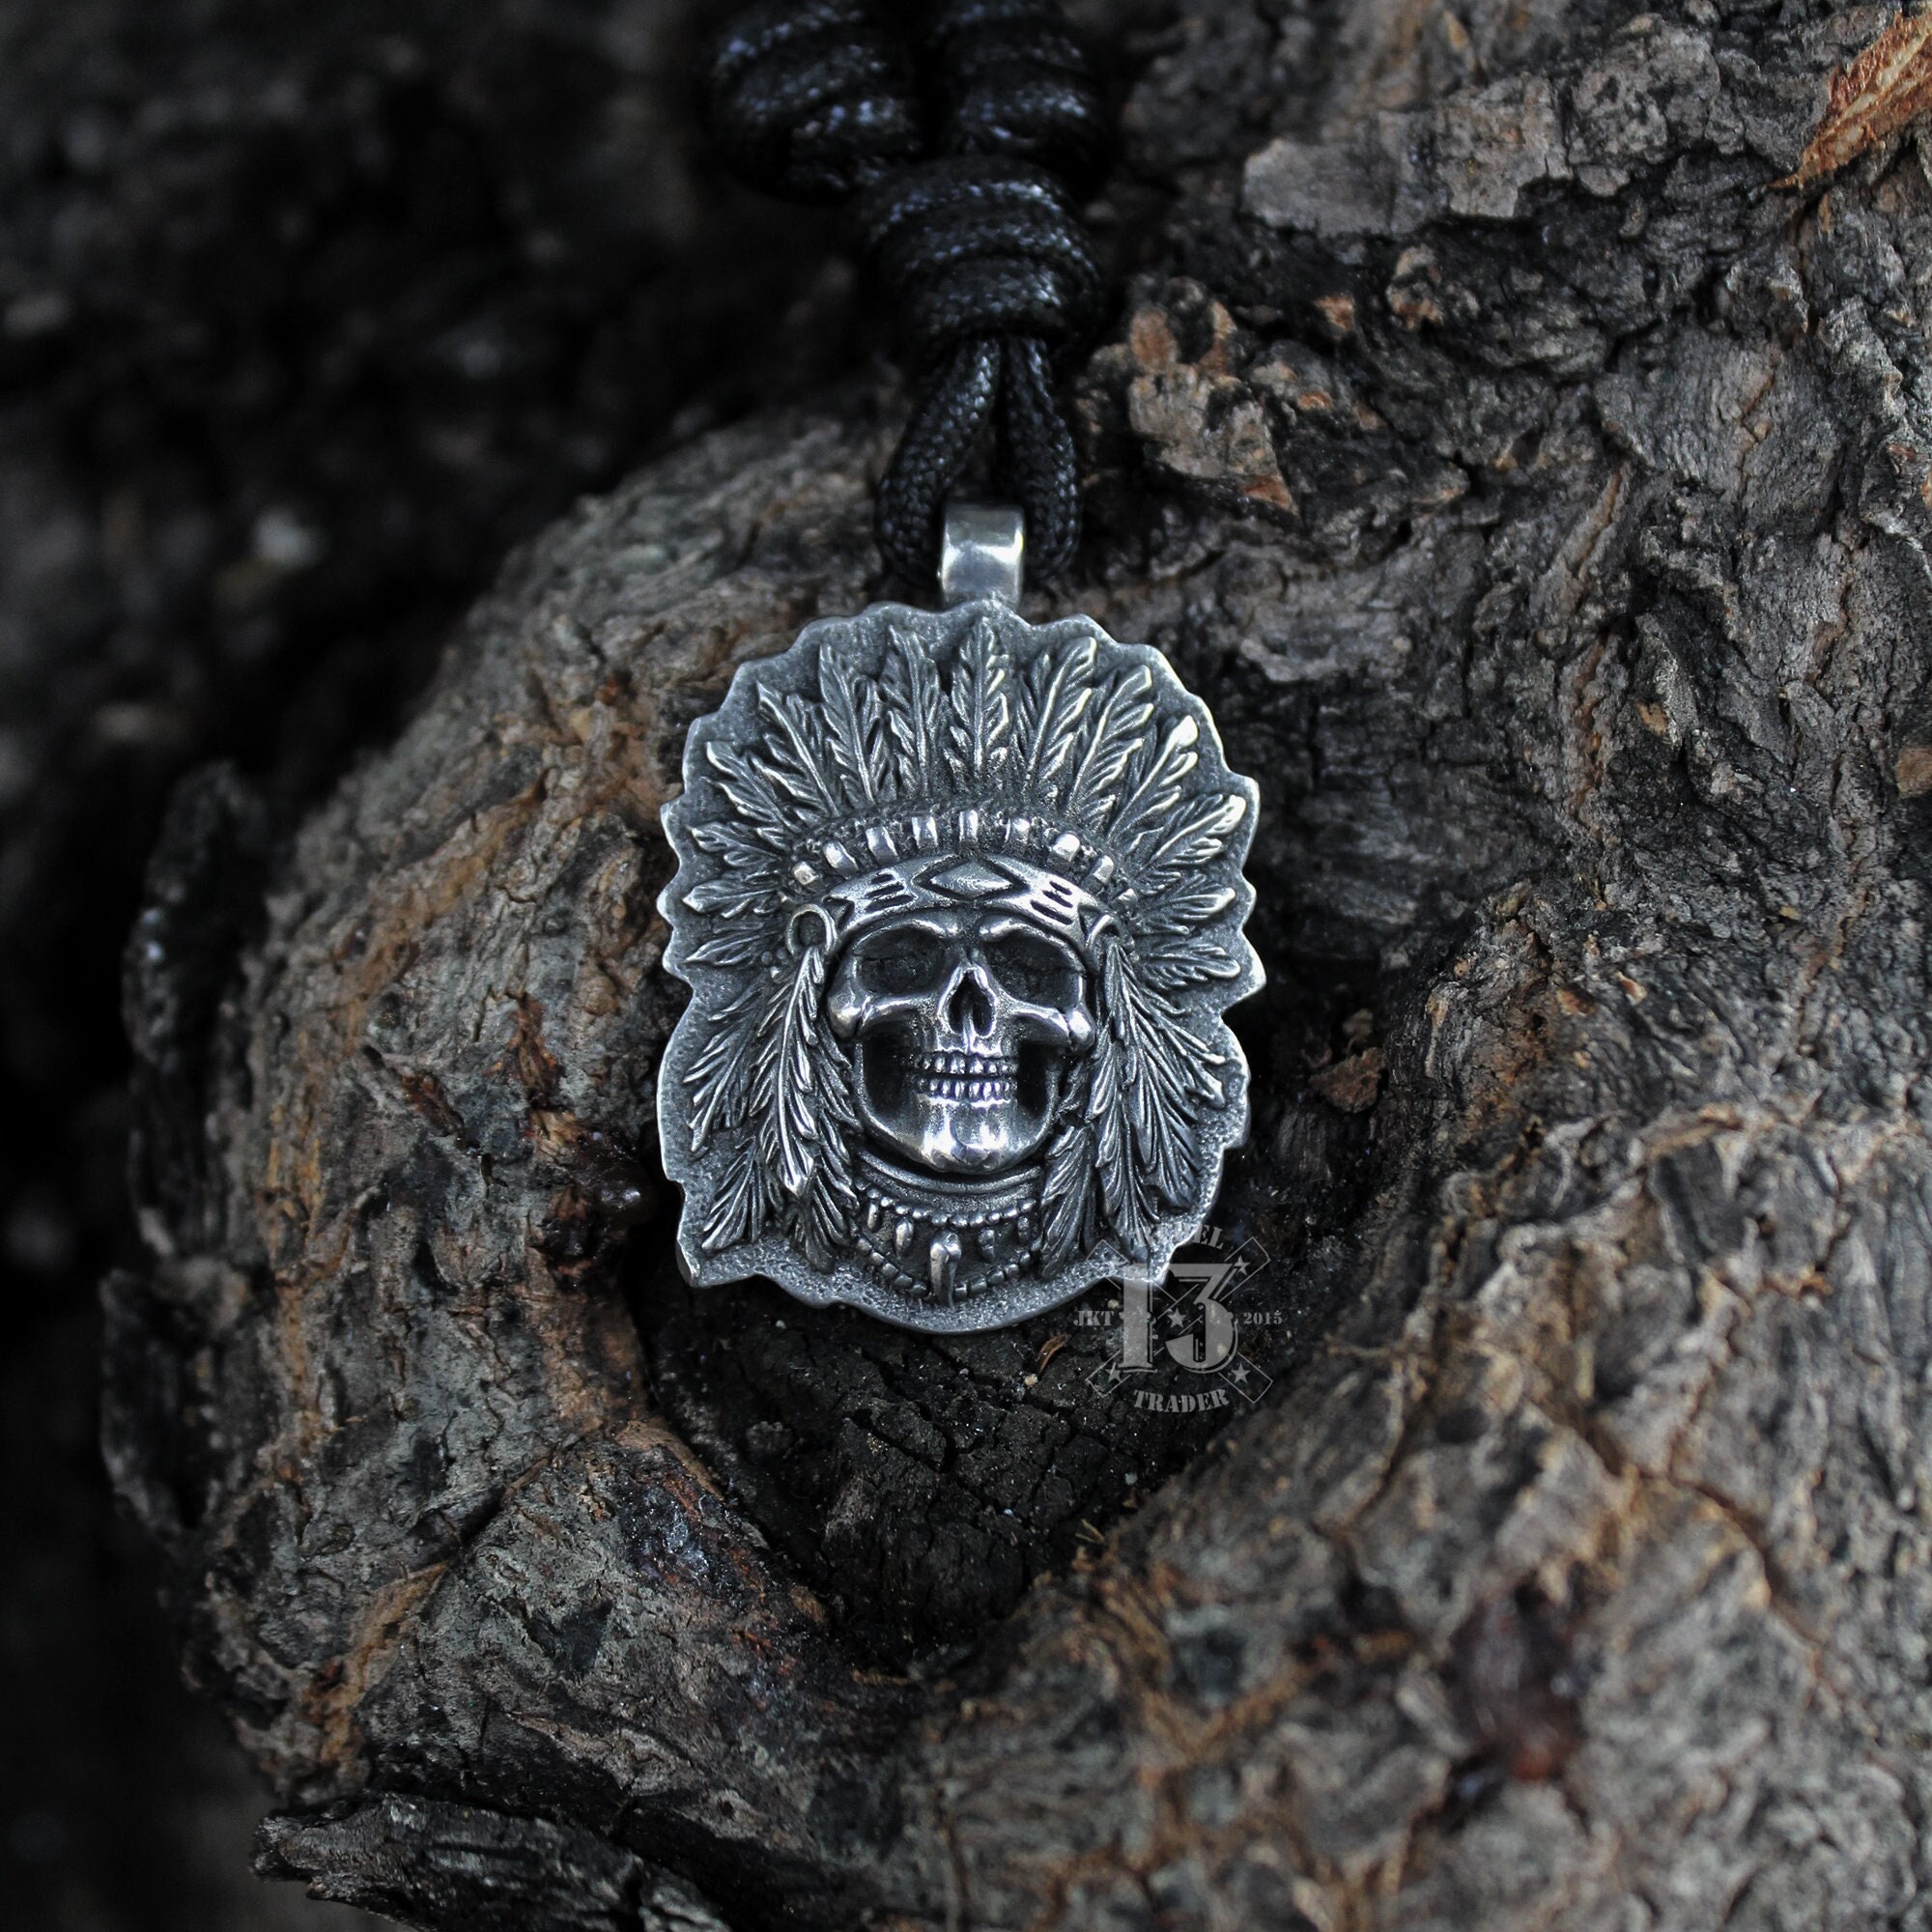 Jewelry Trends Pewter Skull with Cowboy Hat Pendant on Black